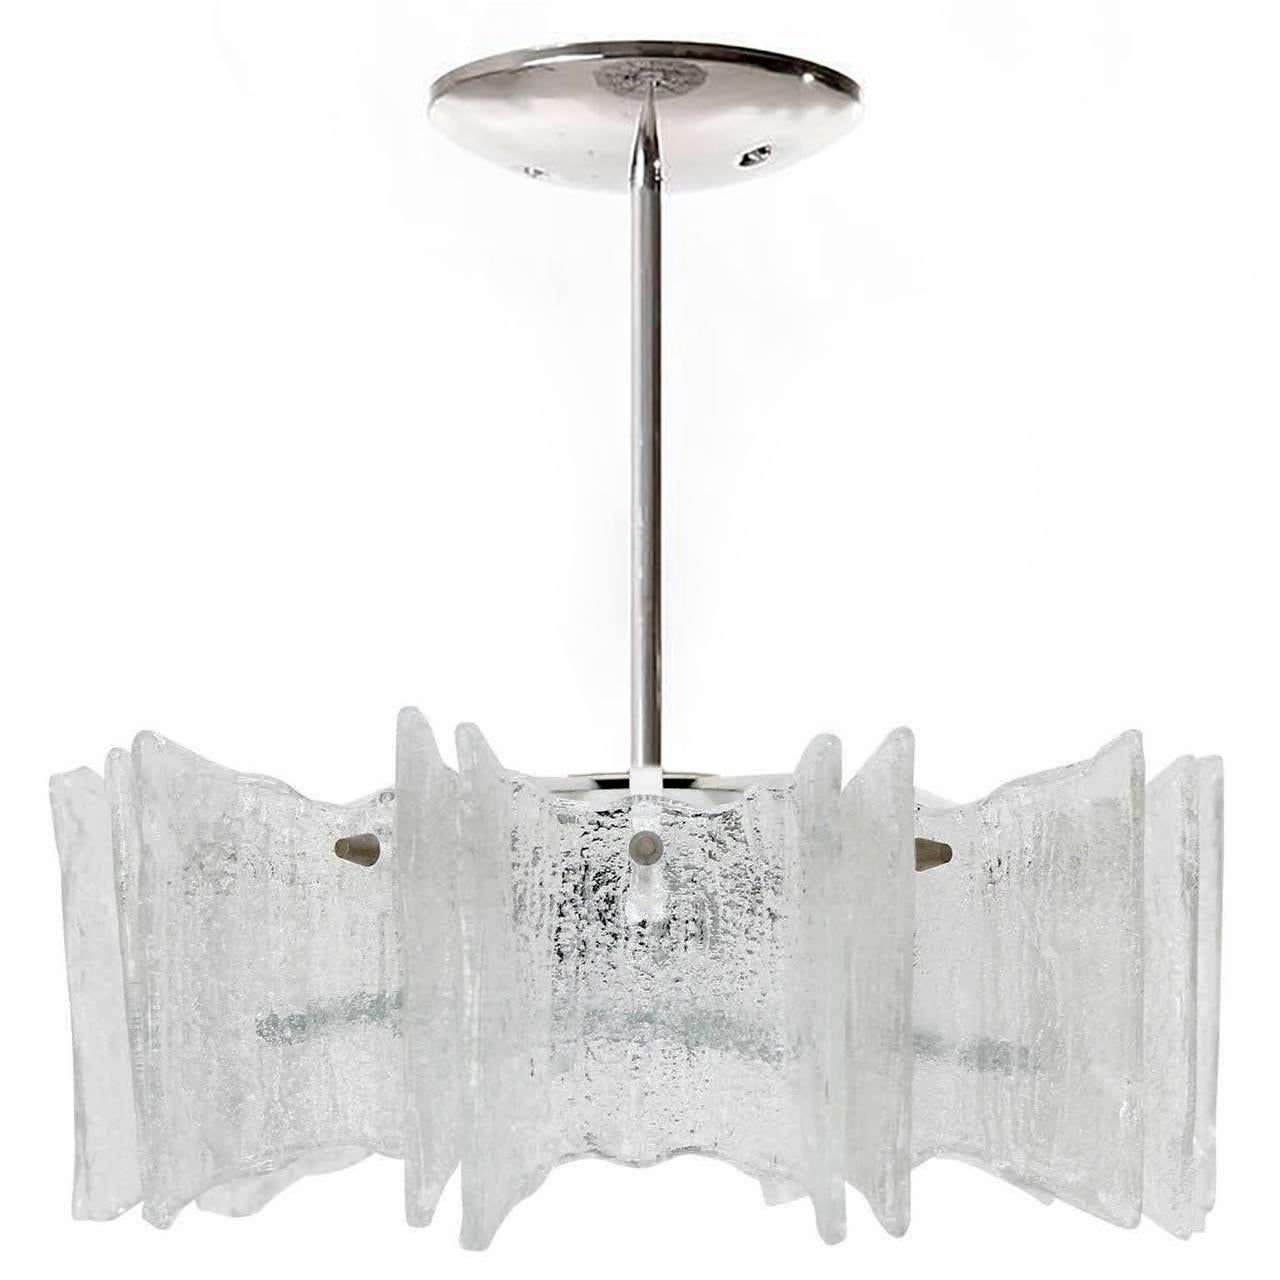 A beautiful star-shaped light fixture by Kalmar Vienna, Austria, manufactured in midcentury, circa 1970 (late 1960s or early 1970s).
Two lights are available.
It is made of frosted clear glass, a white lacquered frame, and nickel-plated (chrome)